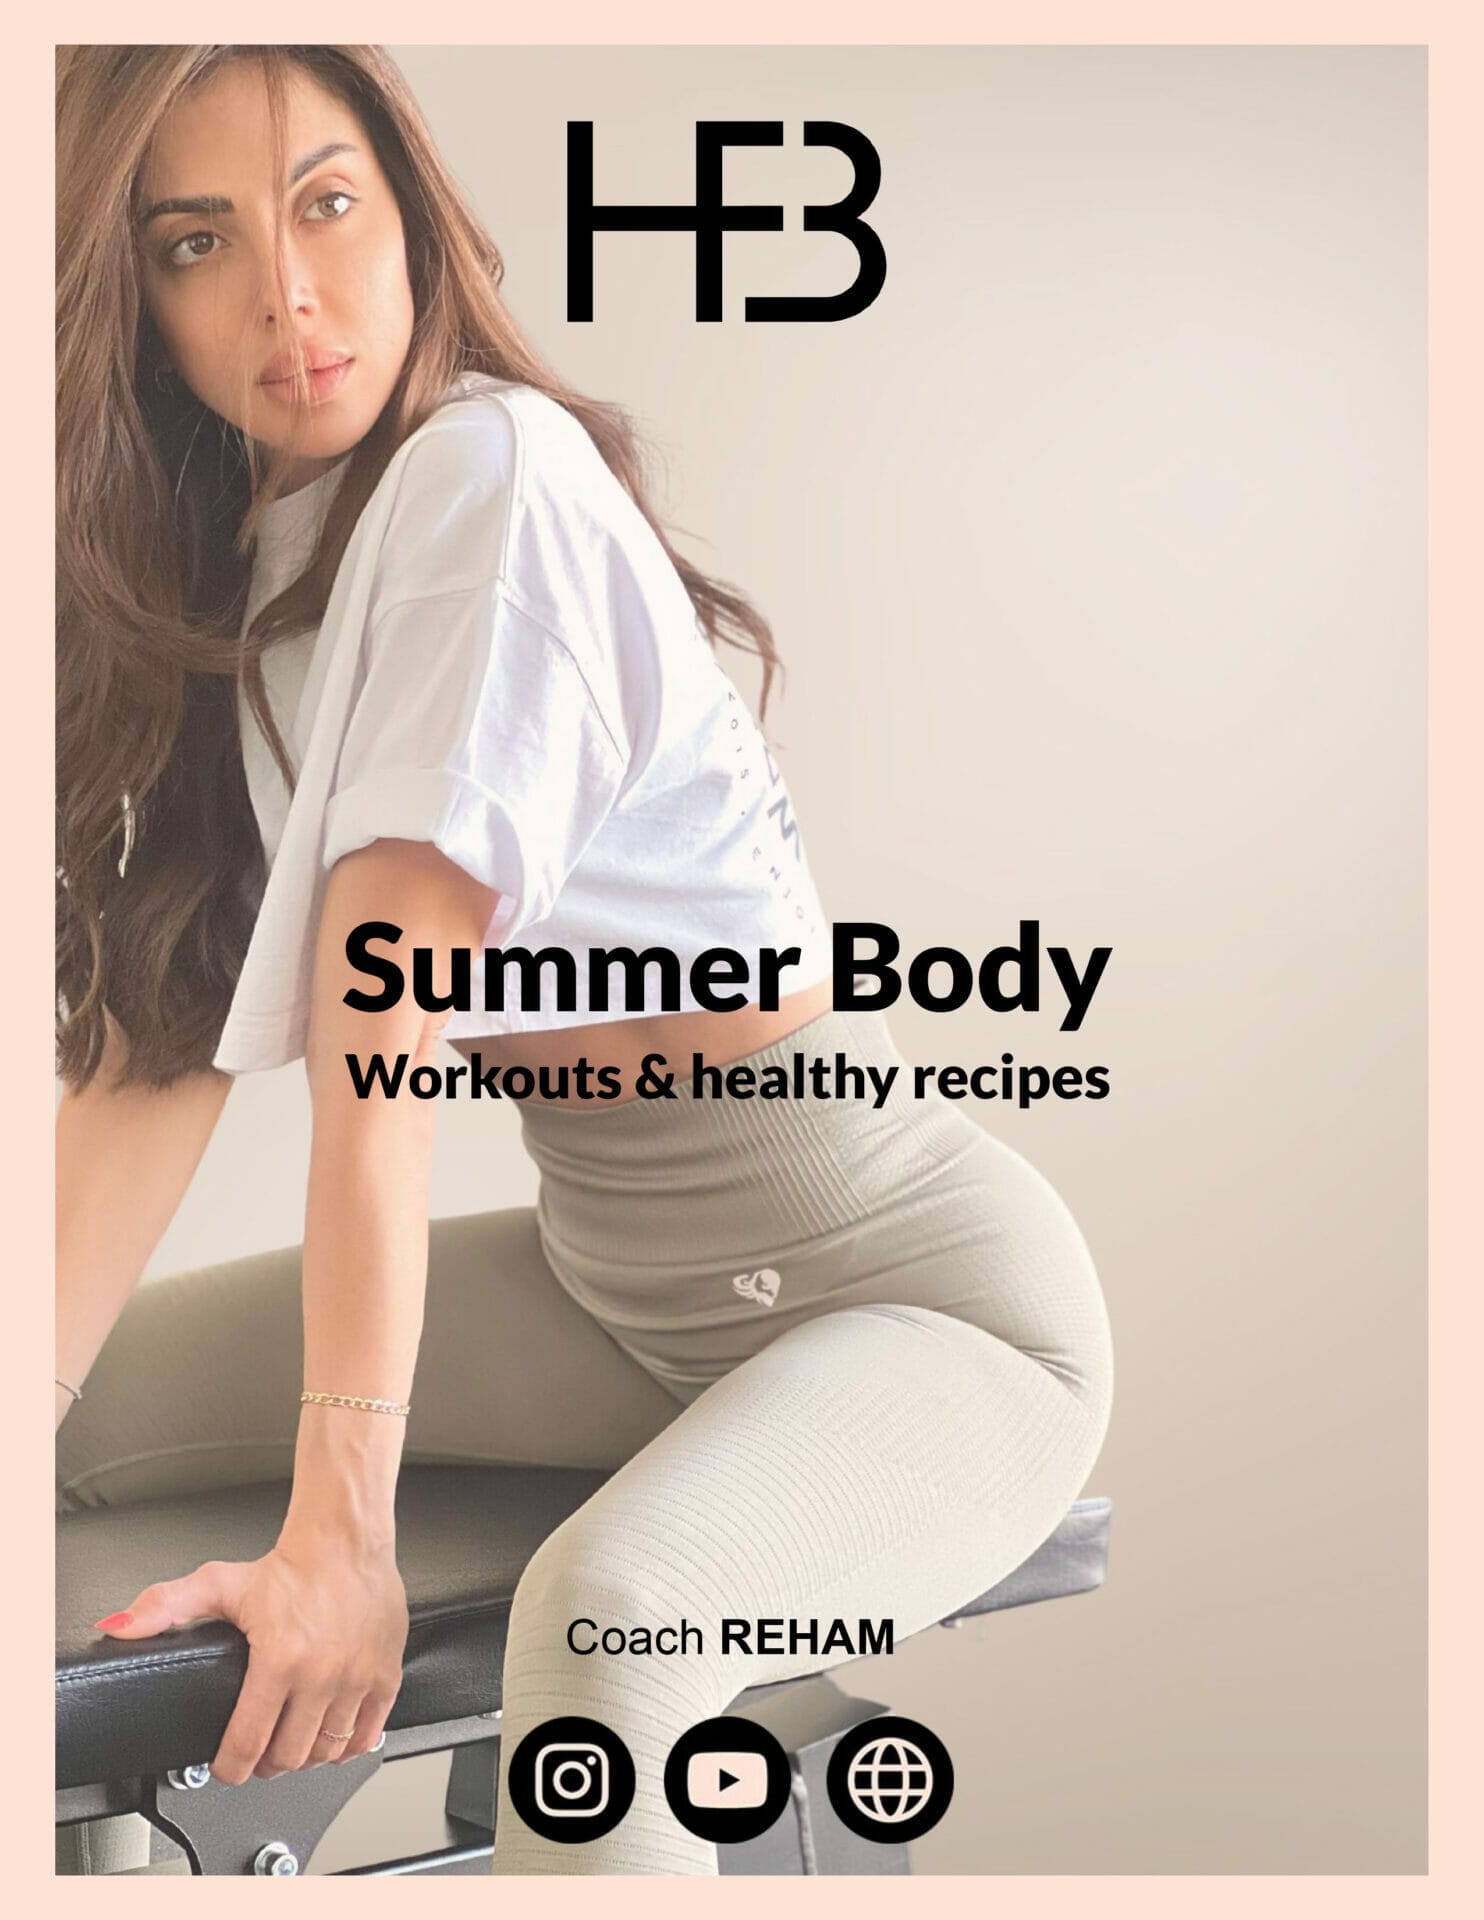 Summer Body Workout Program featuring targeted workouts and nutritious recipes for achieving a fit and toned physique.